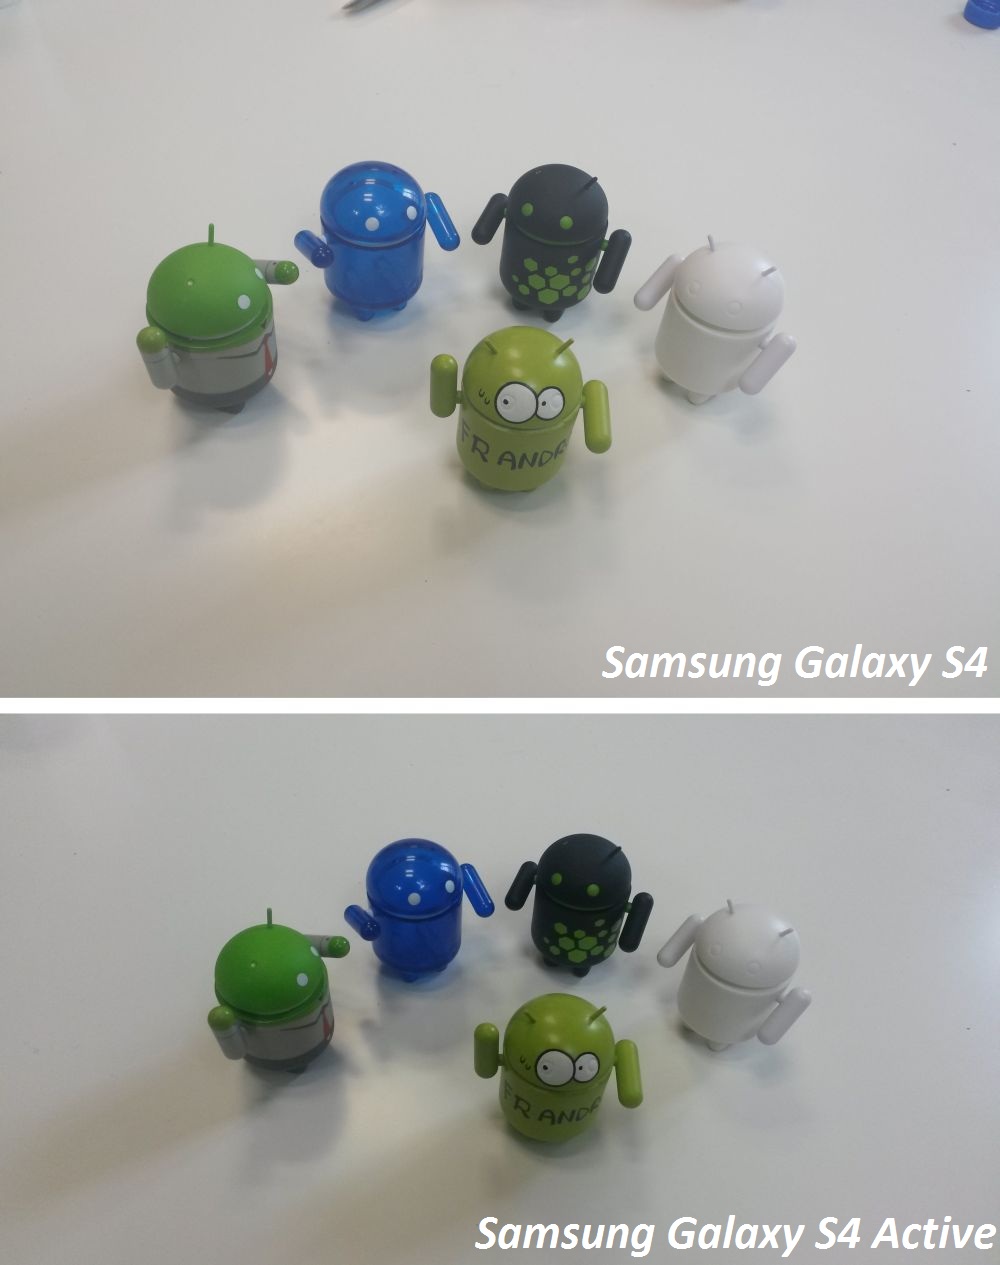 extrait android samsung galaxy s4 vs samsung galaxy s4 active test photo intérieur 1